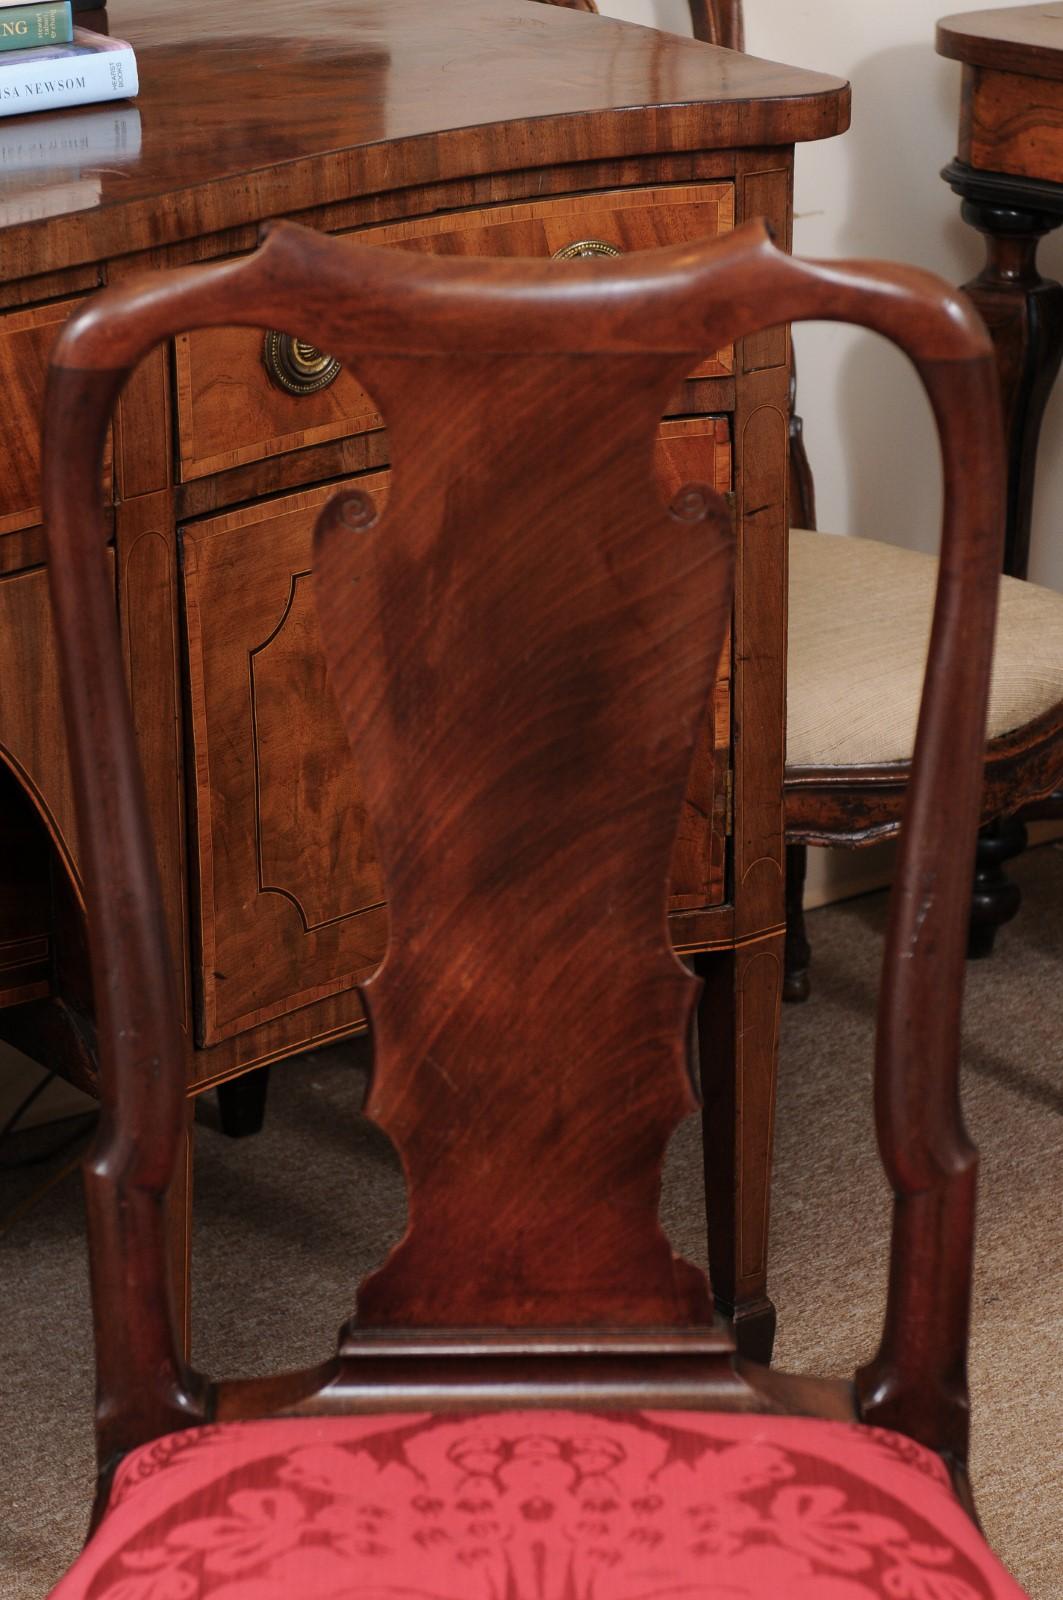 Pair of Queen Anne Side Chairs in Walnut with Cabriole Legs & Pad Feet, 18th C 2